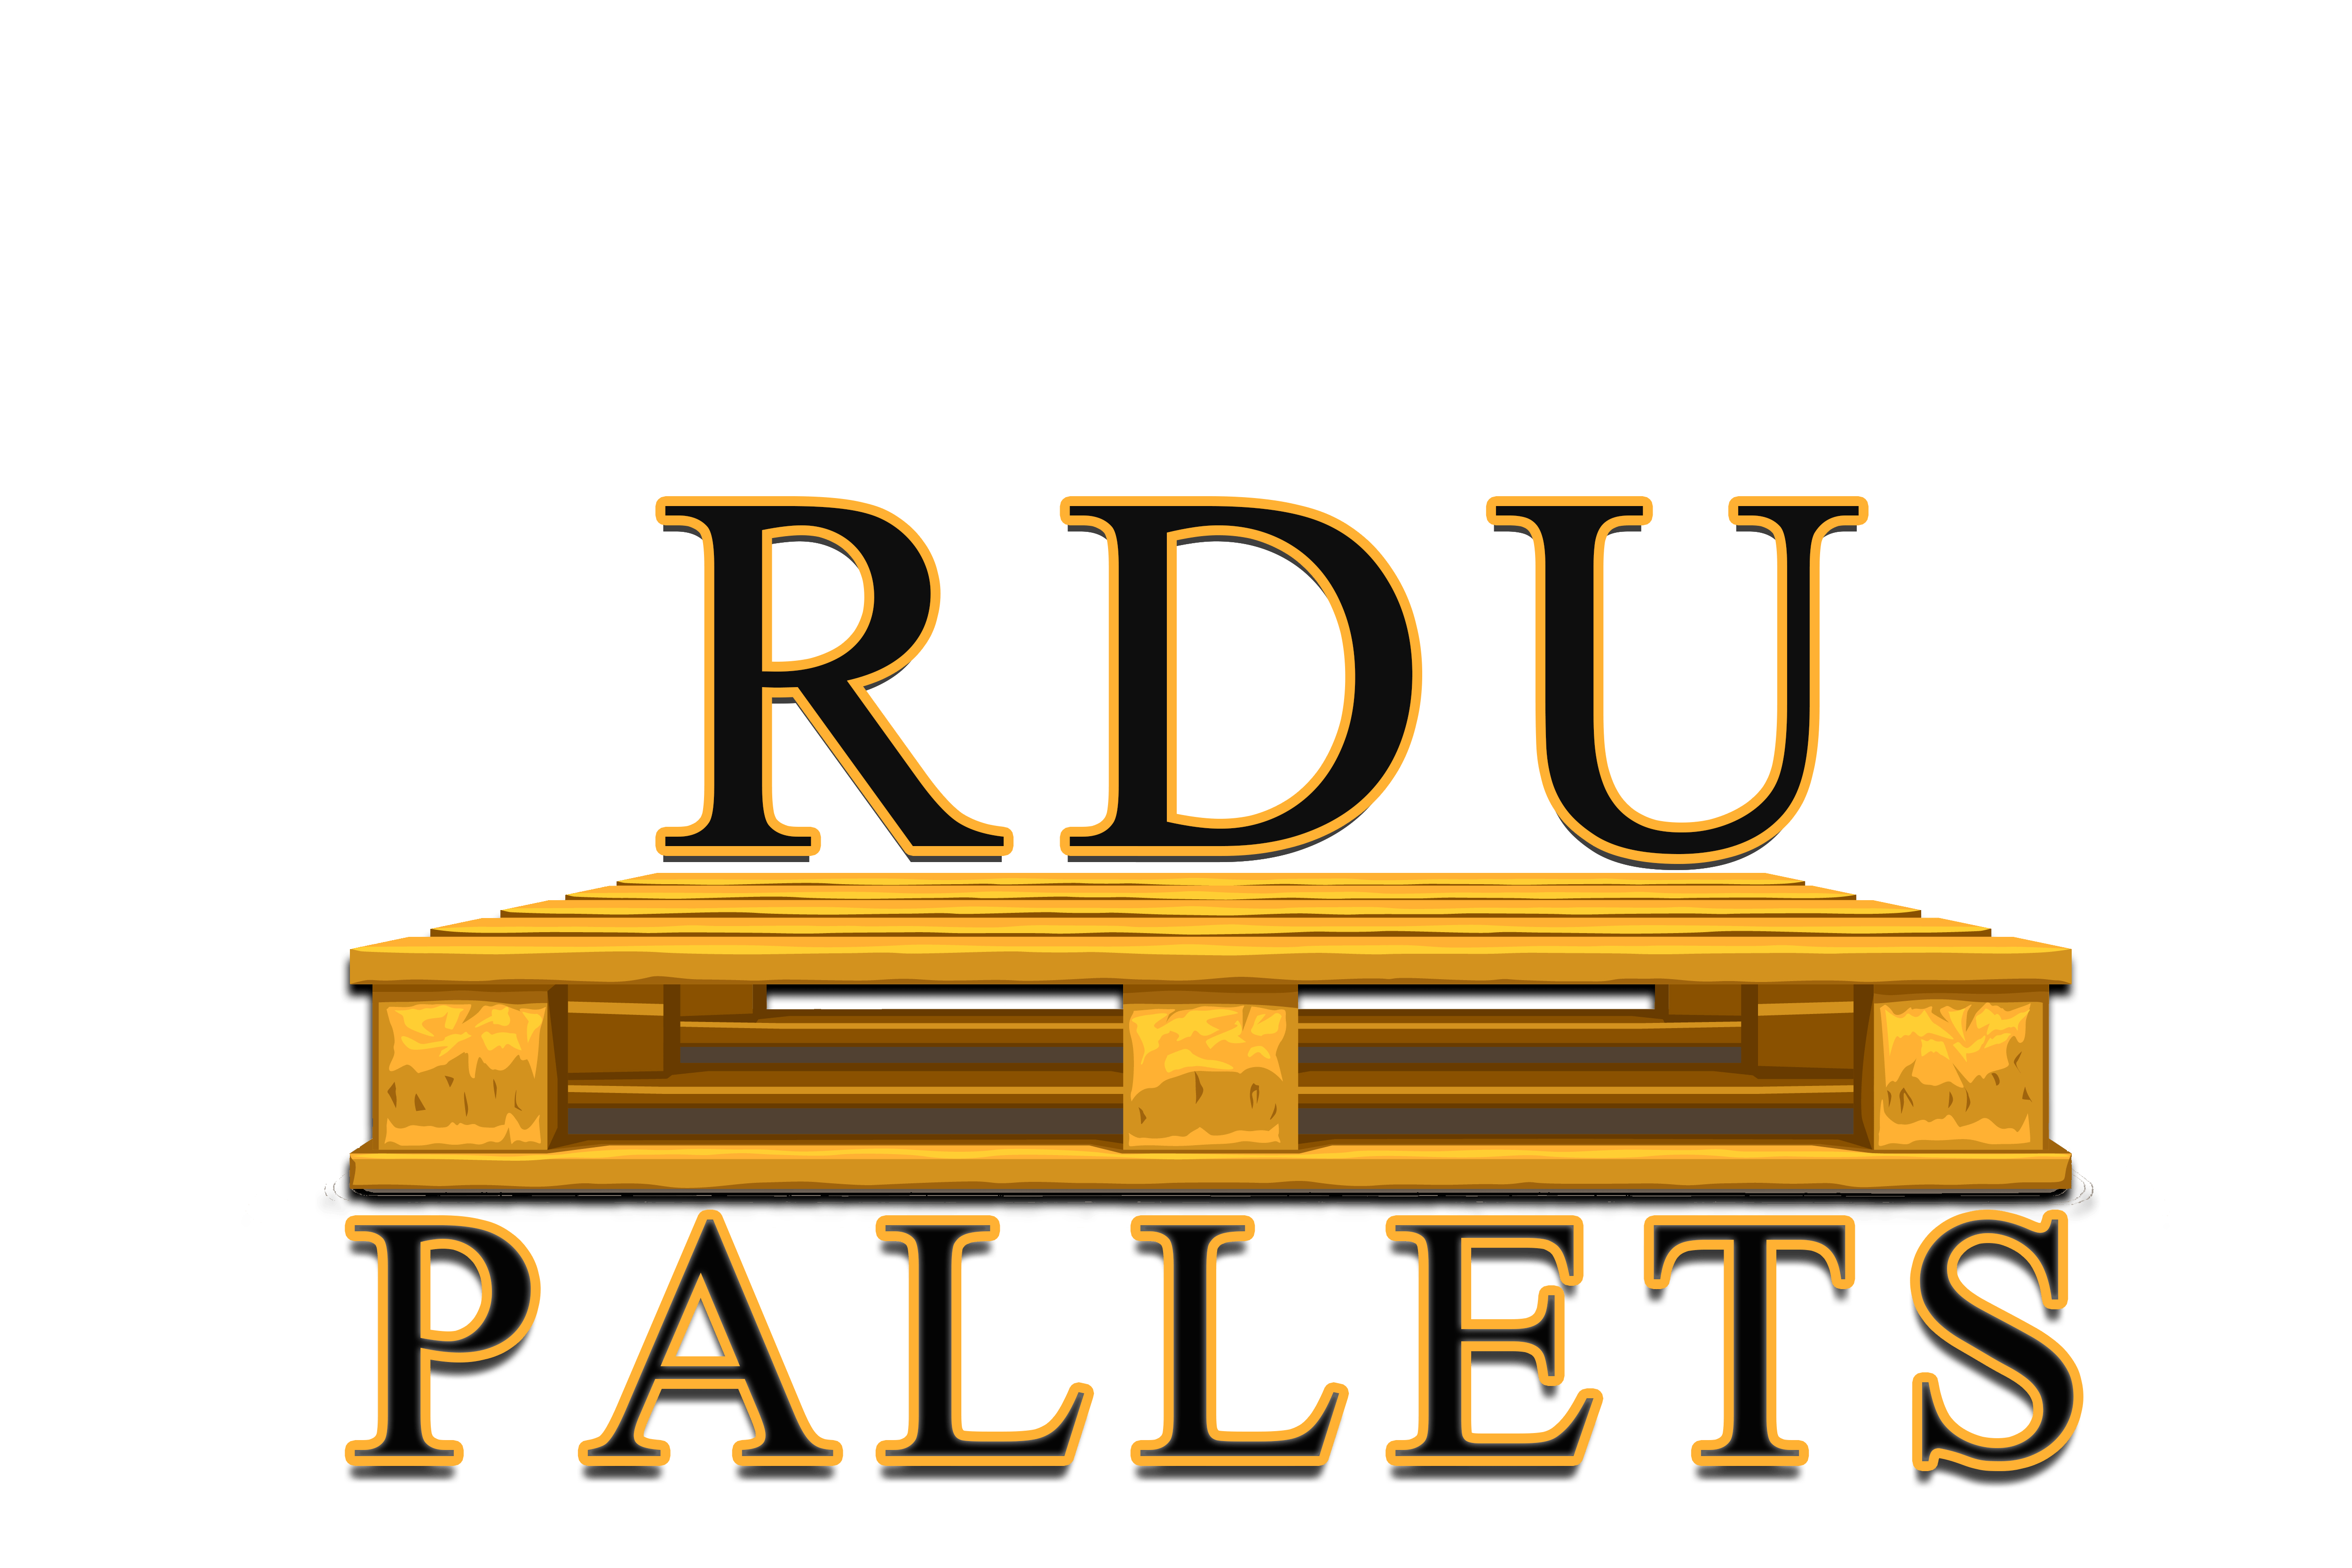 Where Can I Sell Wood Pallets Near Me? - RDU Pallets